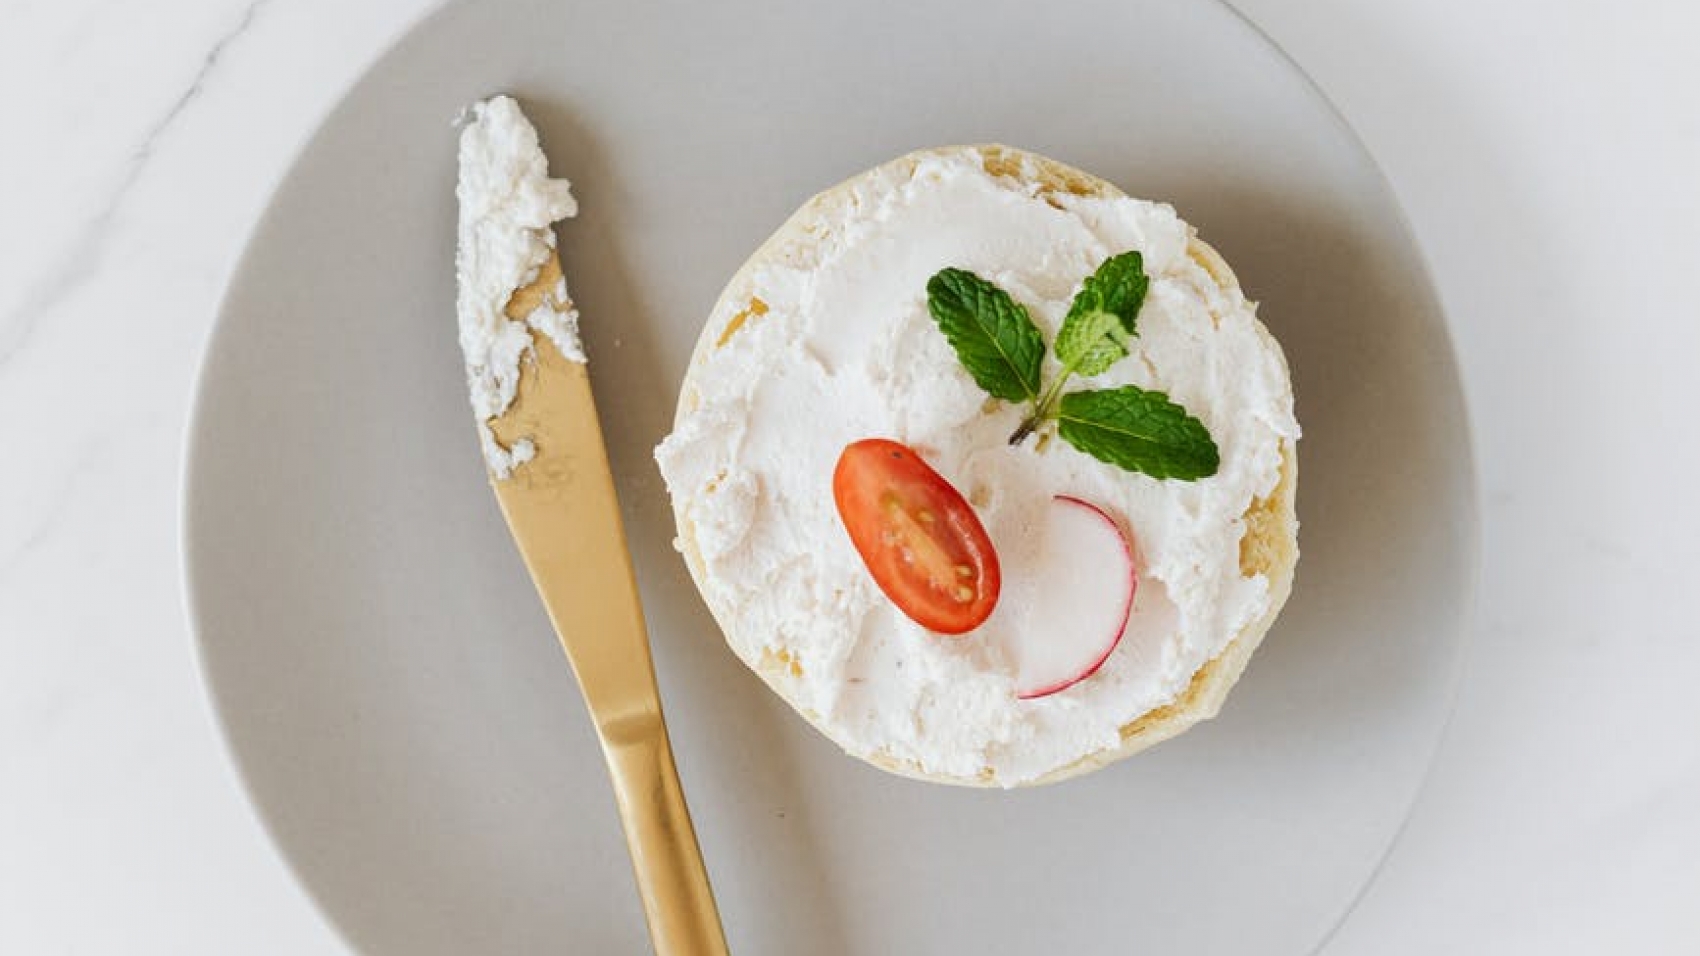 https://www.pexels.com/photo/bun-with-cottage-cheese-and-vegetable-on-platter-with-knife-4198016/